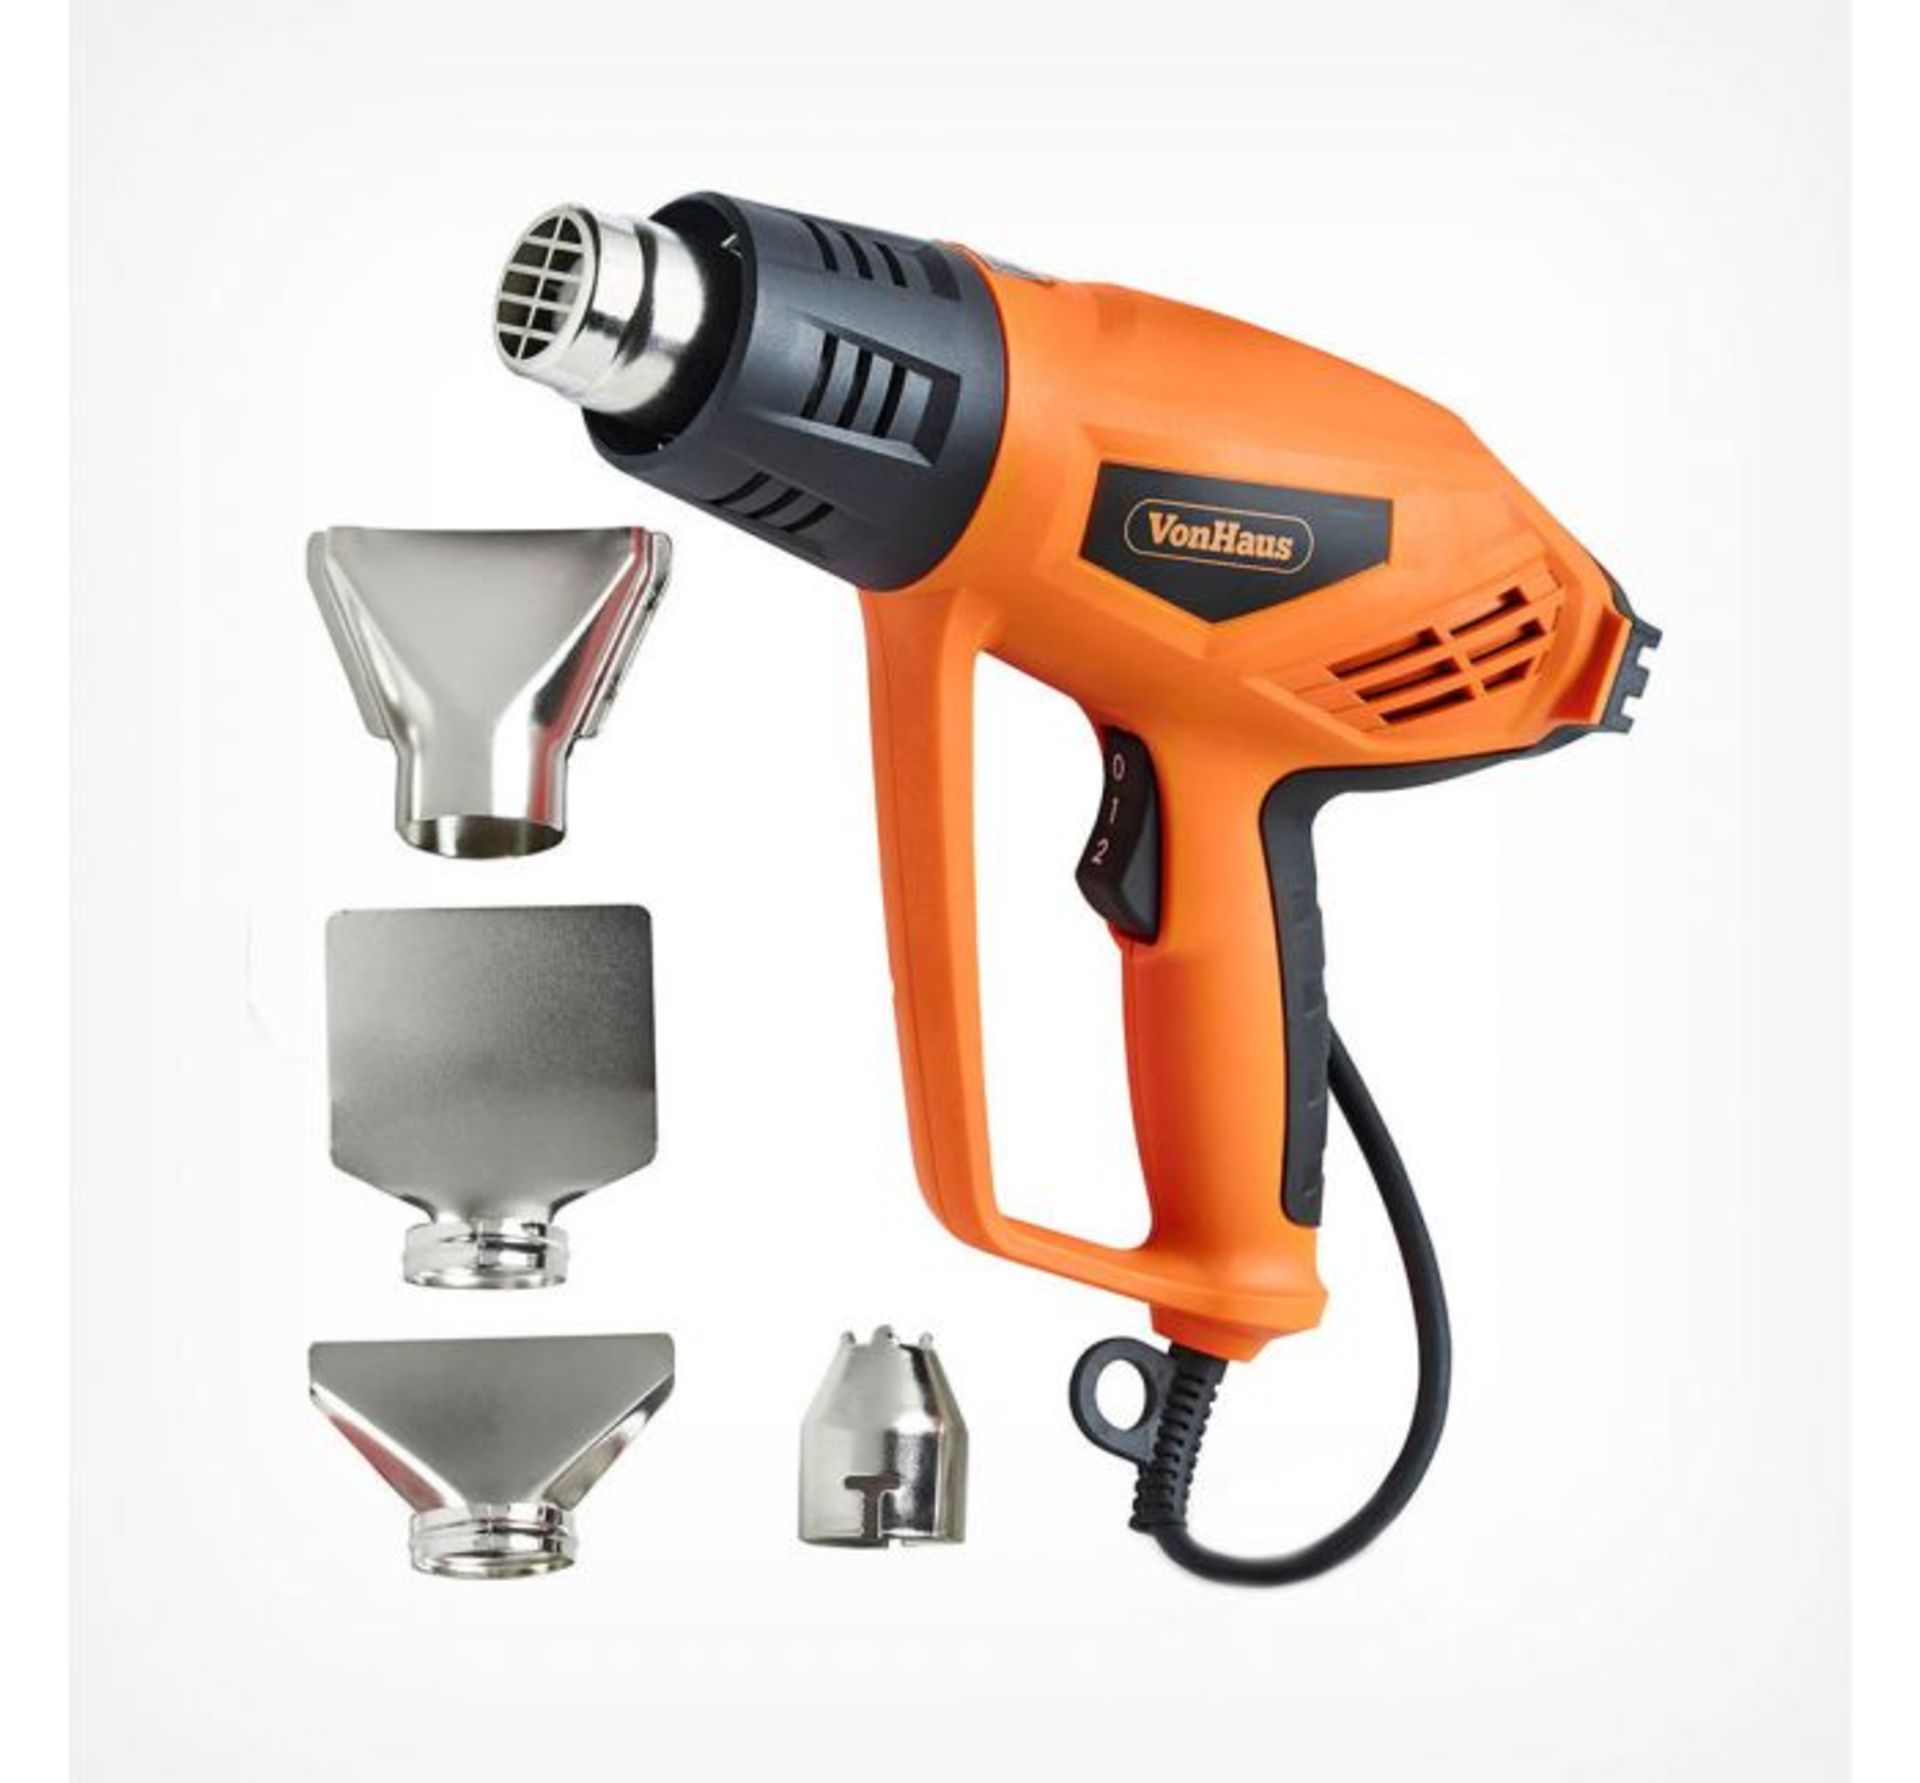 (F11) 2000W Heat Gun Ideal for DIY projects, bending copper pipes, loosening rusted bolts, lig... - Image 2 of 4